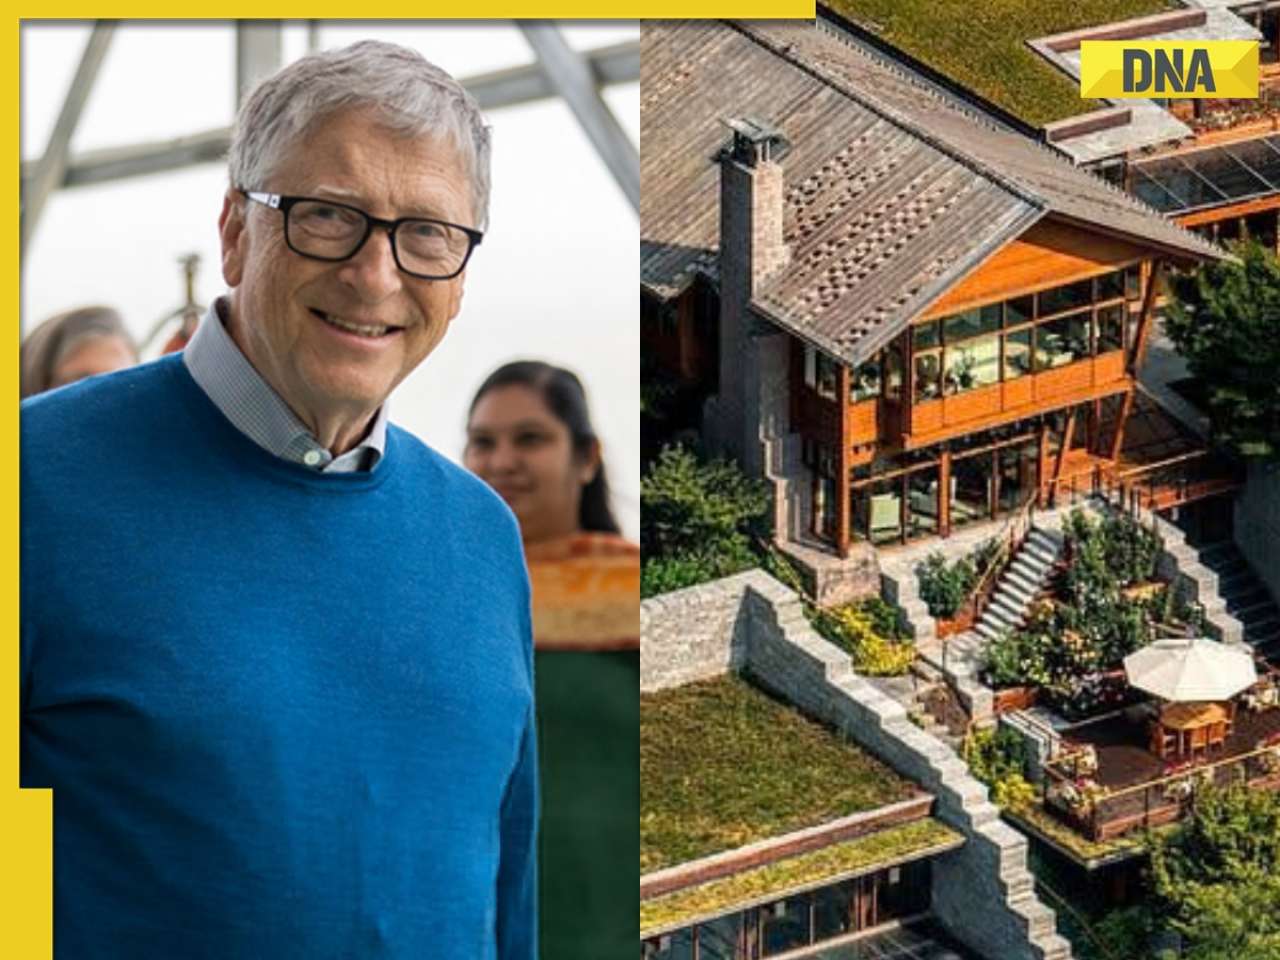 Underwater music system, private tunnel: Details of Bill Gates' mansion, but is it costlier than Ambani's Antilia?